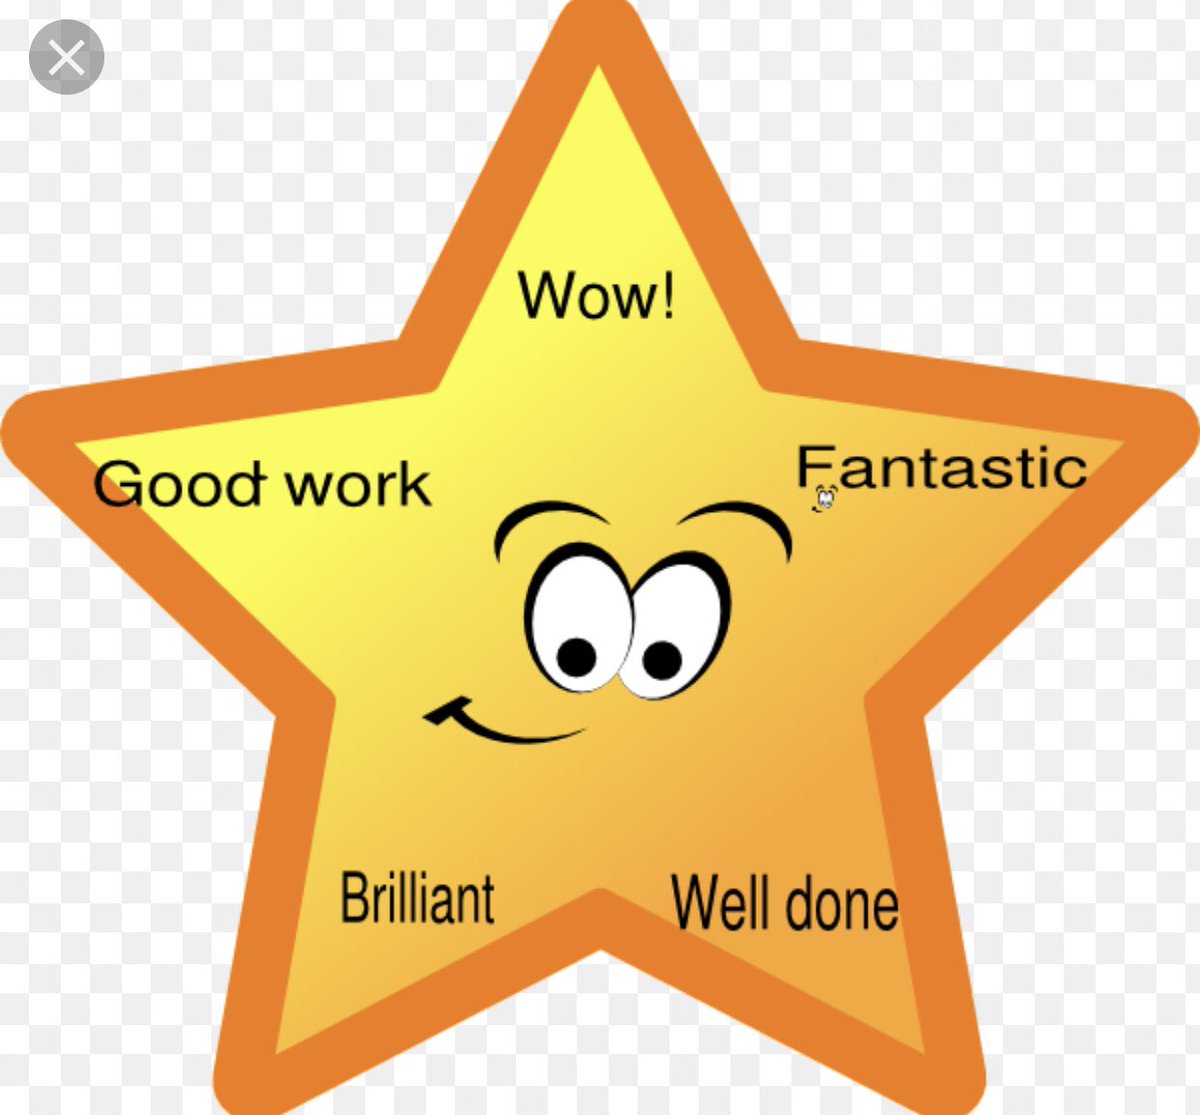 Happy Friday everyone! Headteacher and Epraise awards being celebrated this morning in our end of half term rewards assembly! Find out later who are winners are..... 🎉🎊🎉 #FridayFeeling #REWARD